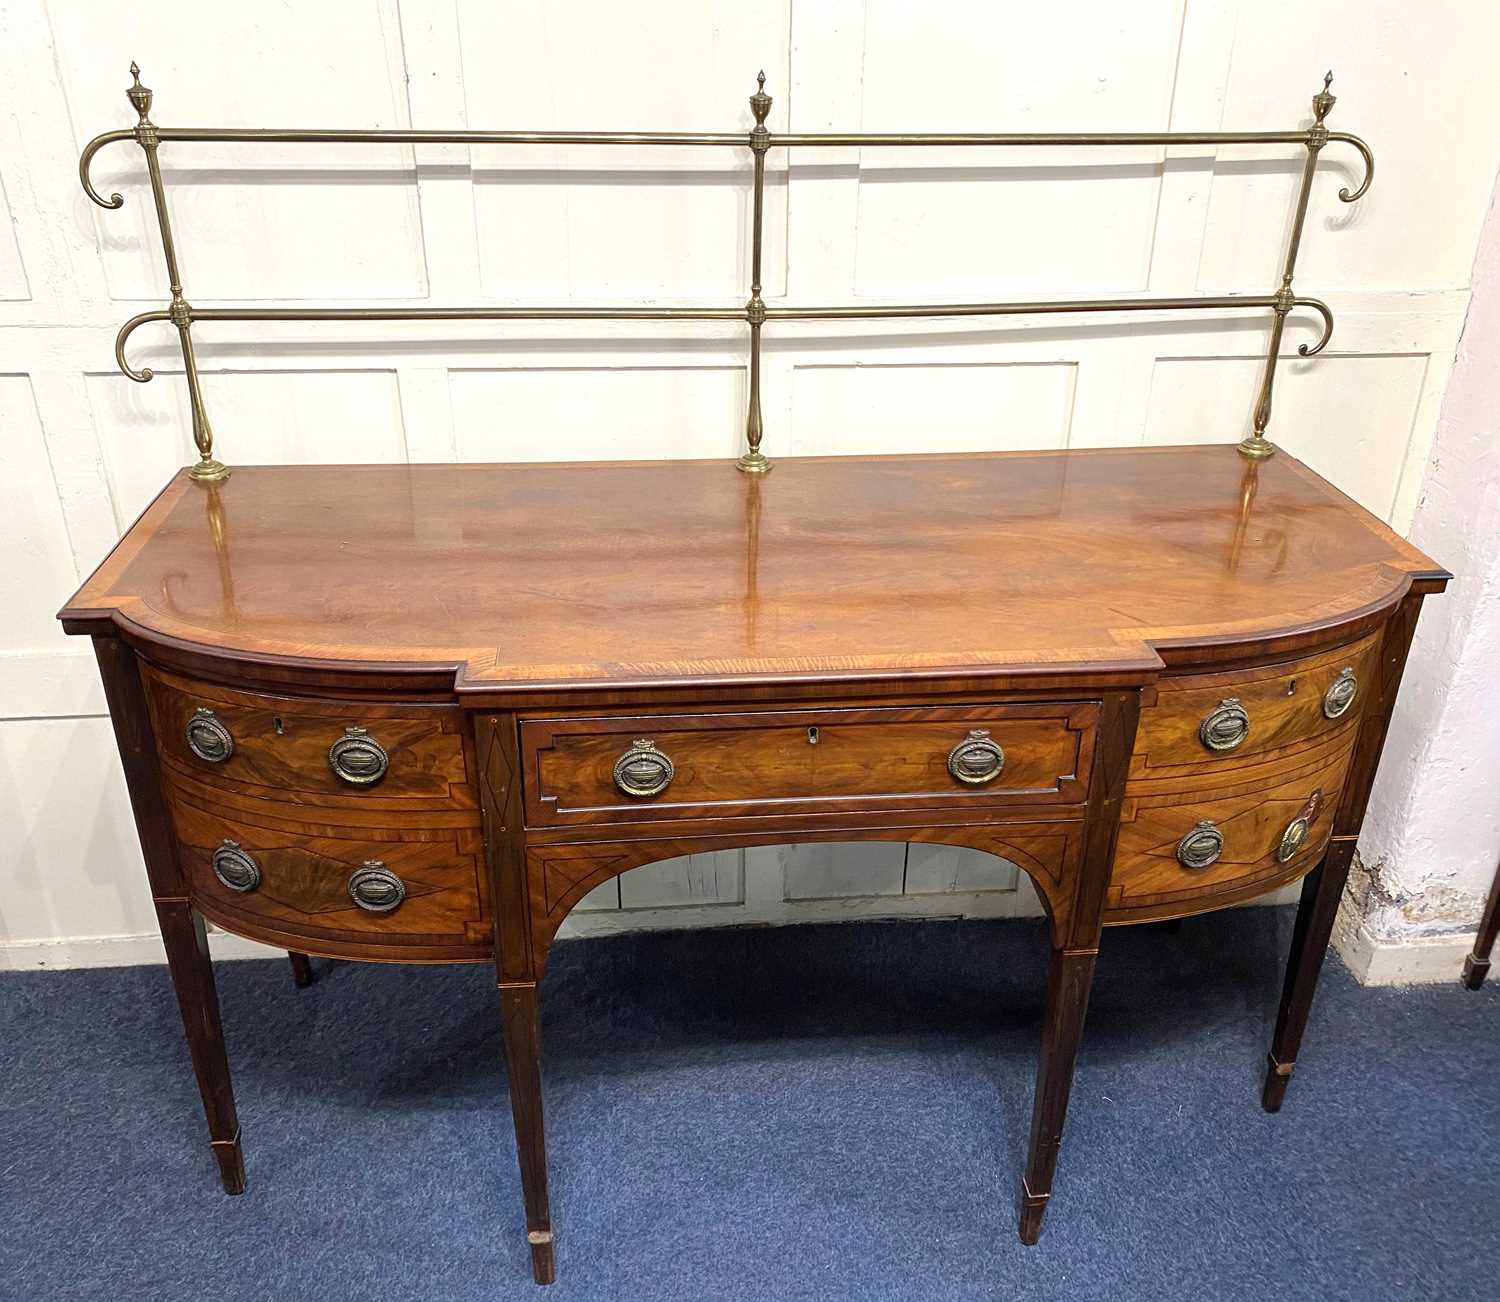 An Edwardian walnut crossbanded break front sideboard, fitted with central drawer flanked by a